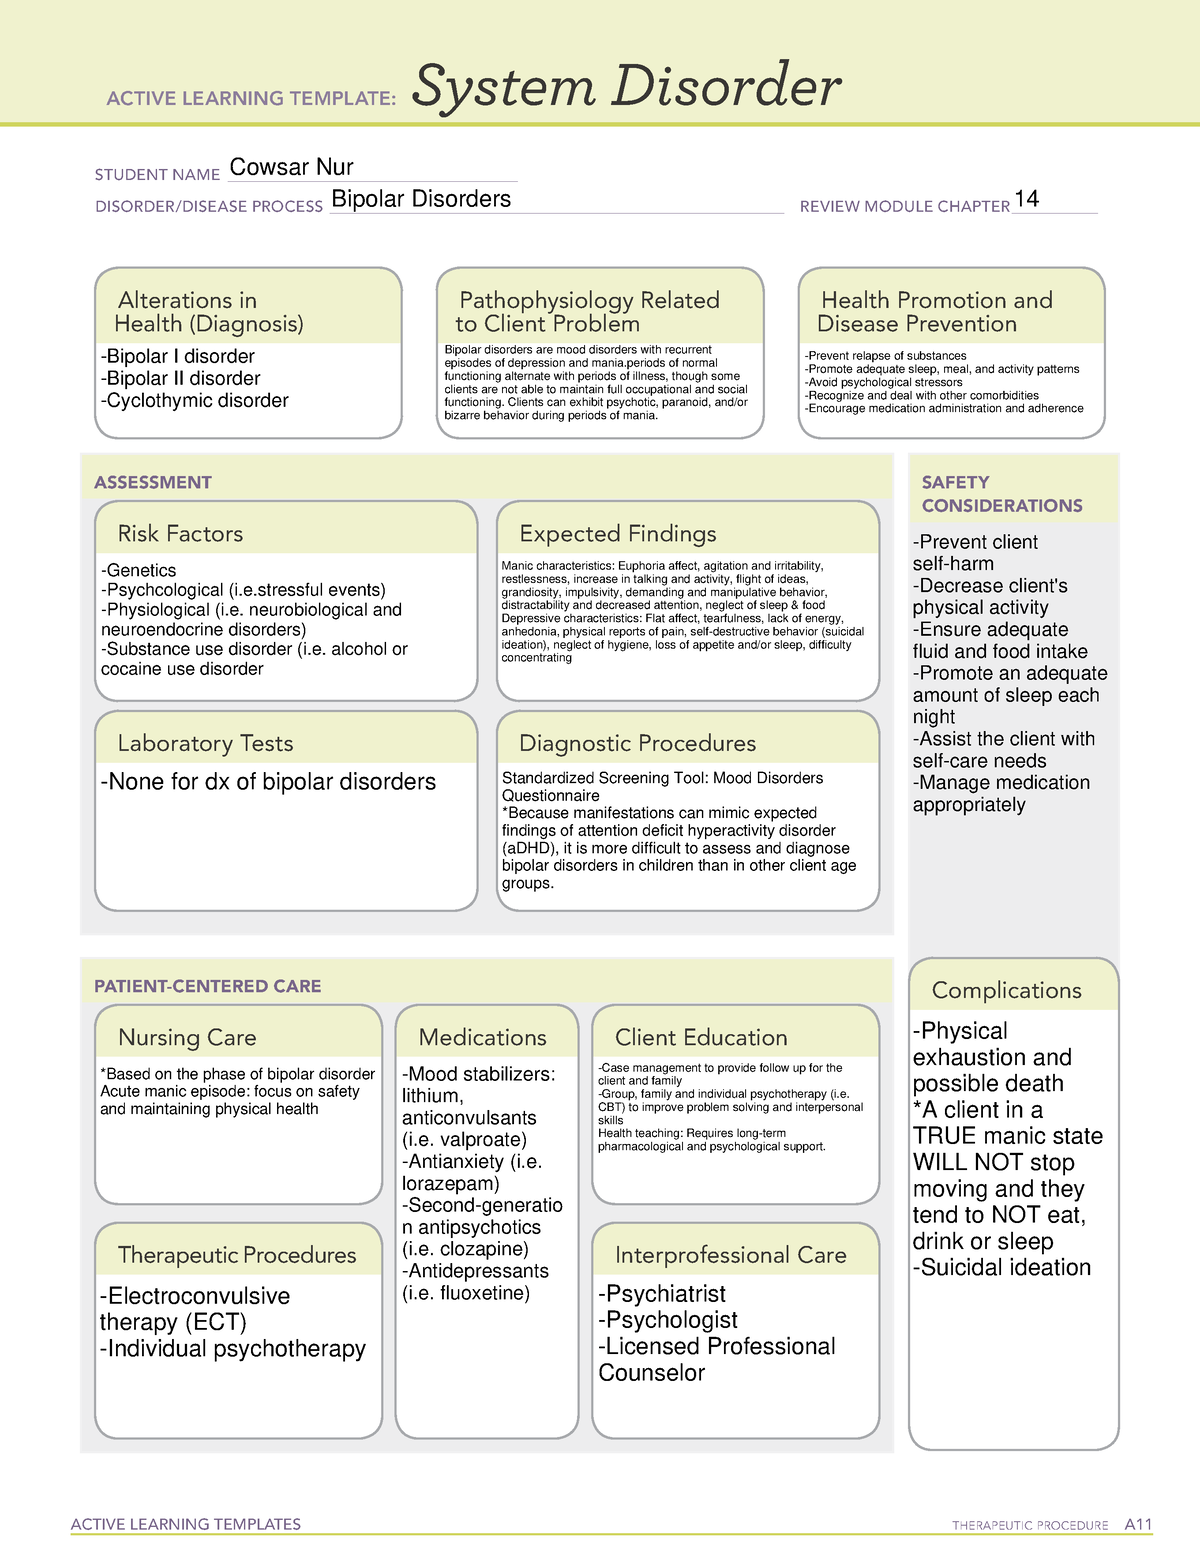 Dysphagia System Disorder Template